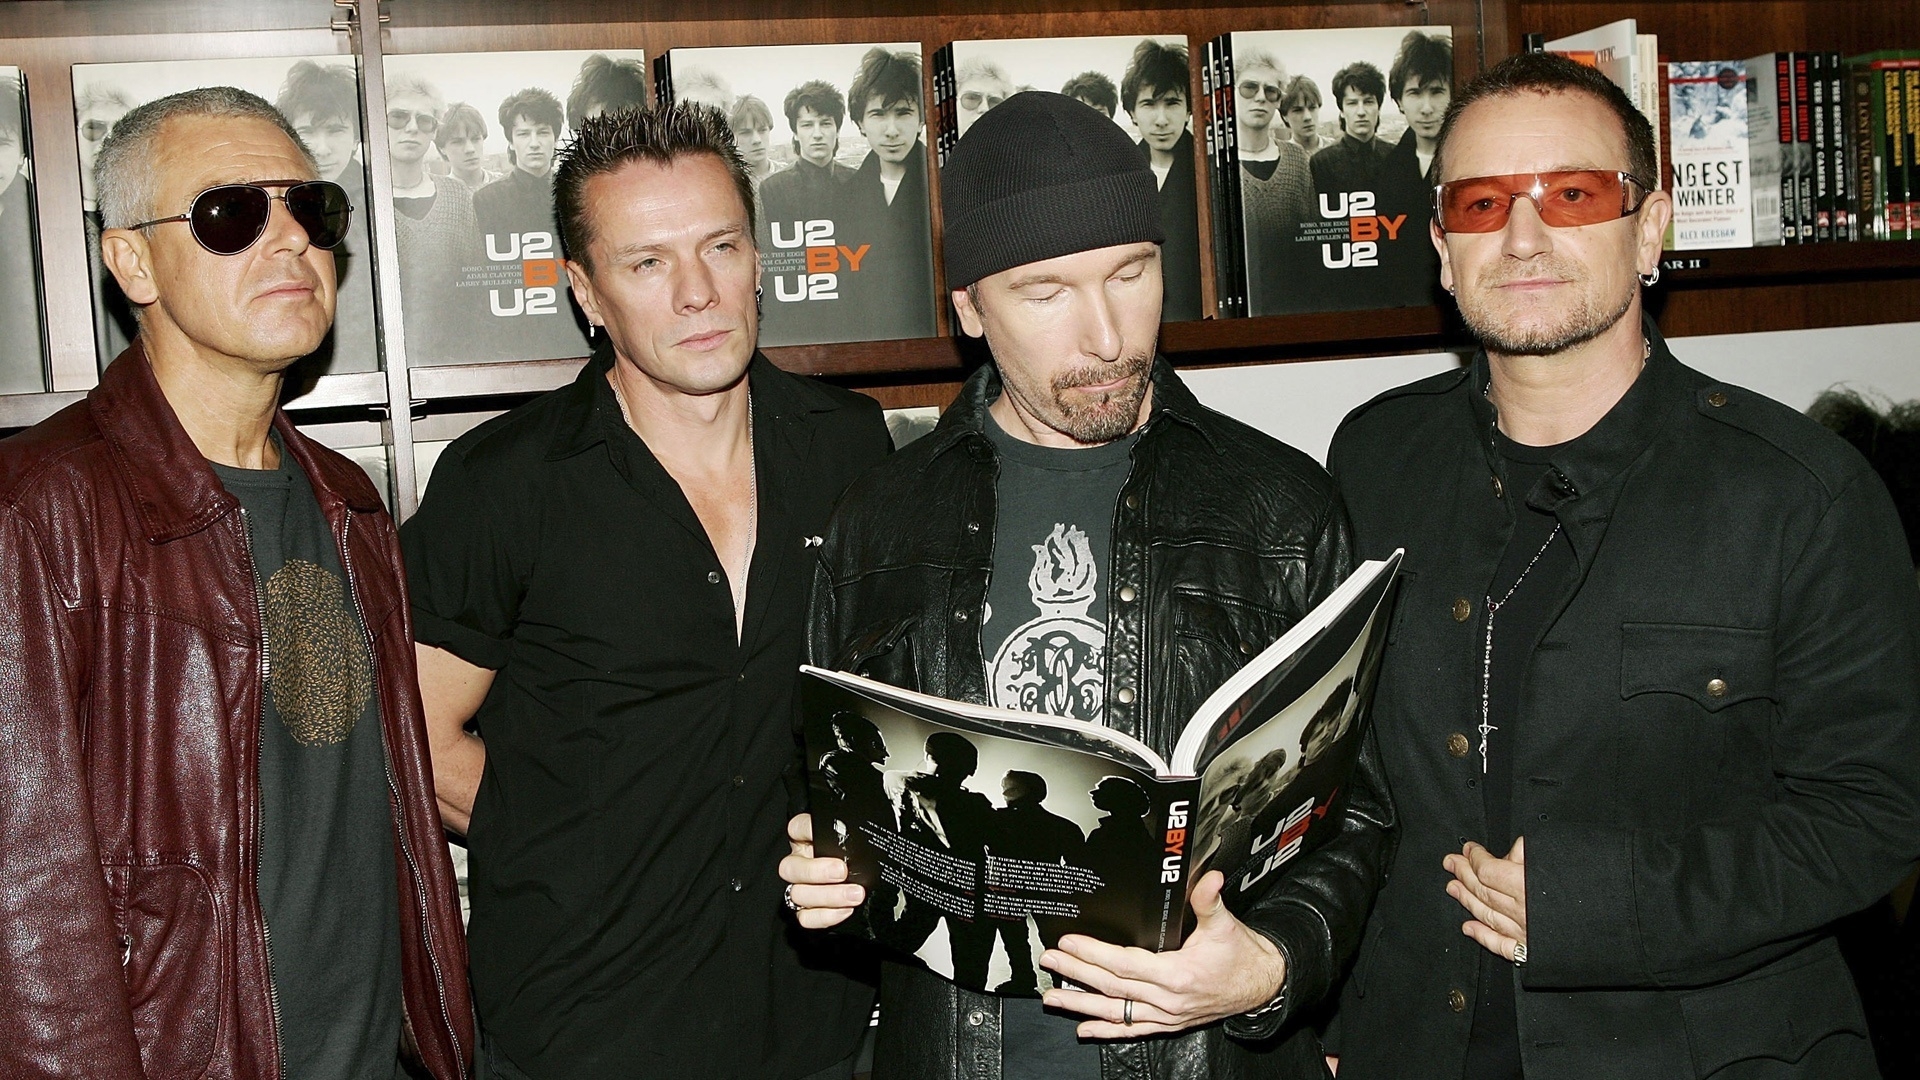 U2 band for 1920 x 1080 HDTV 1080p resolution